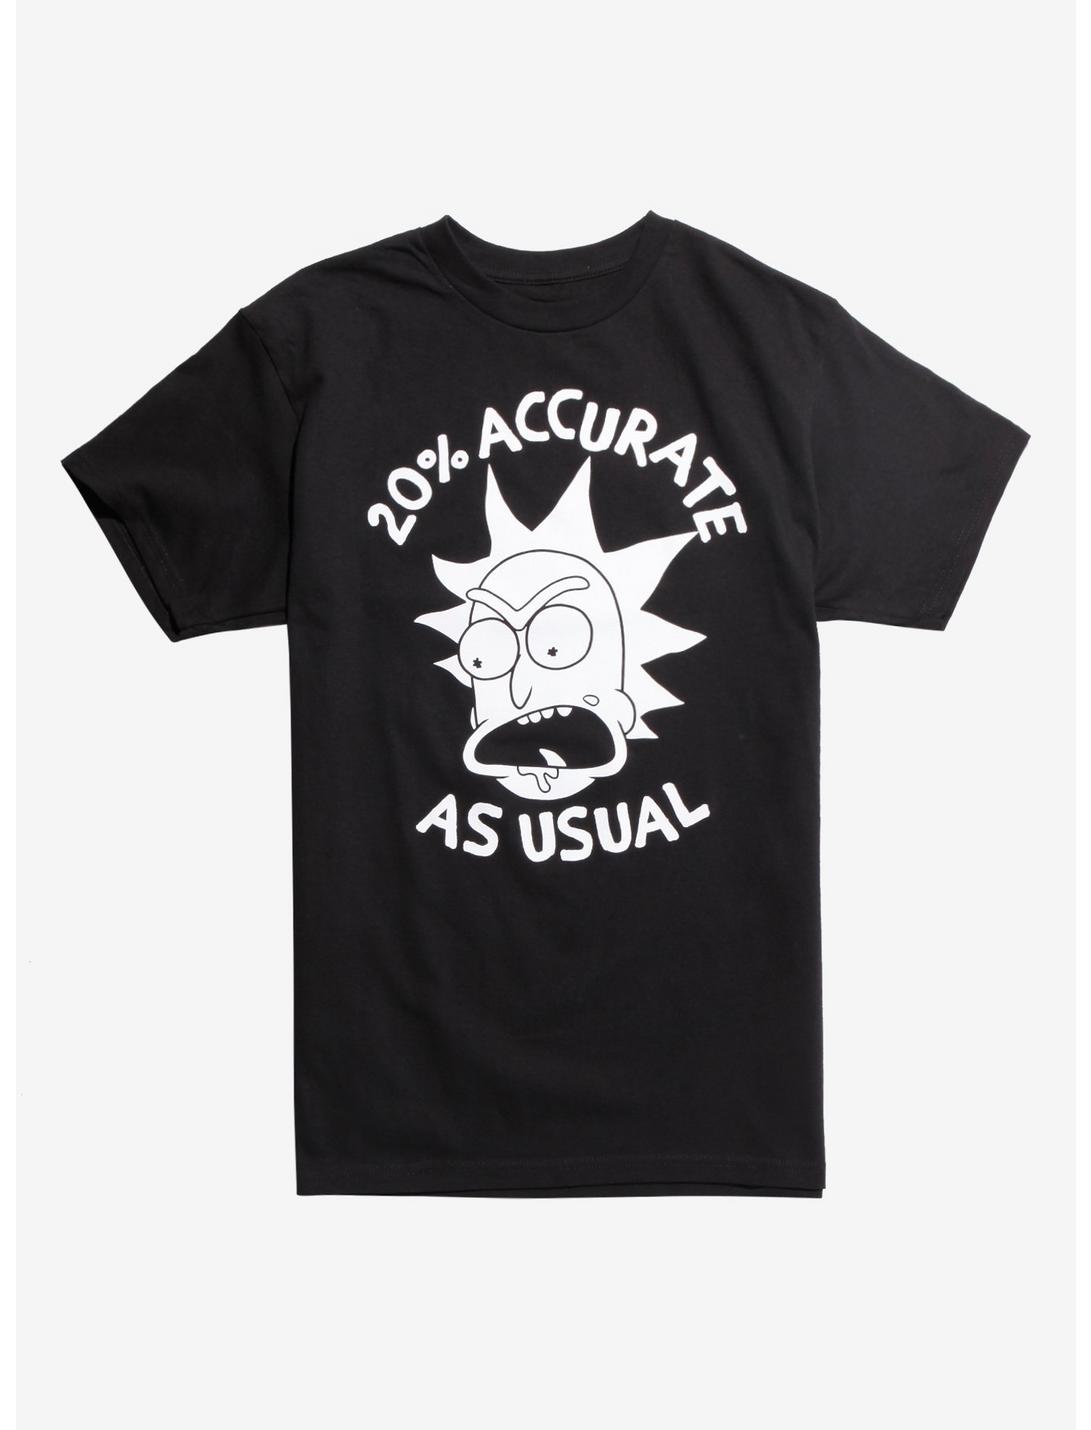 Rick And Morty 20 Percent Accurate As Usual T-Shirt, WHITE, hi-res